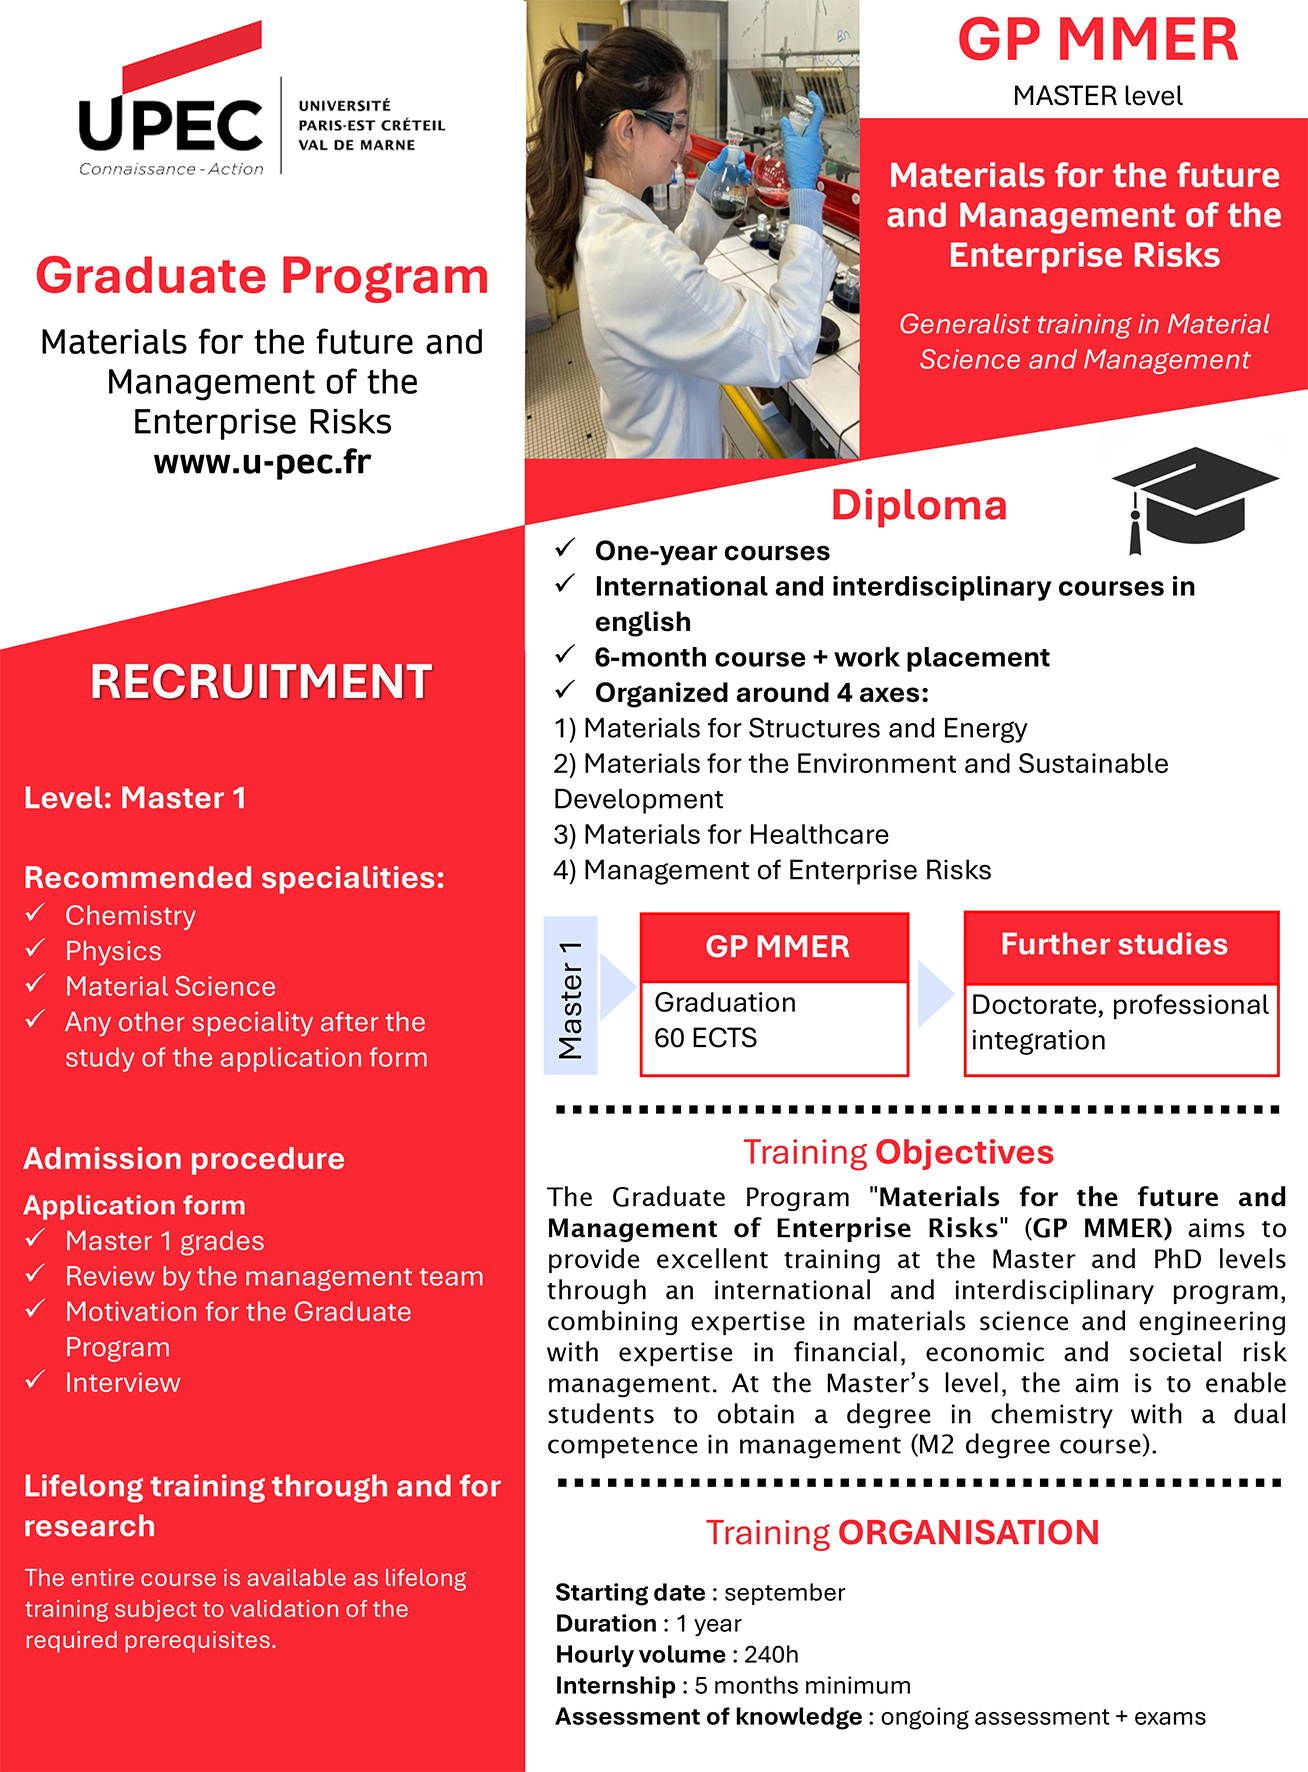 Flyer Graduate Program Materials for the future and Management of the Entreprise Risks